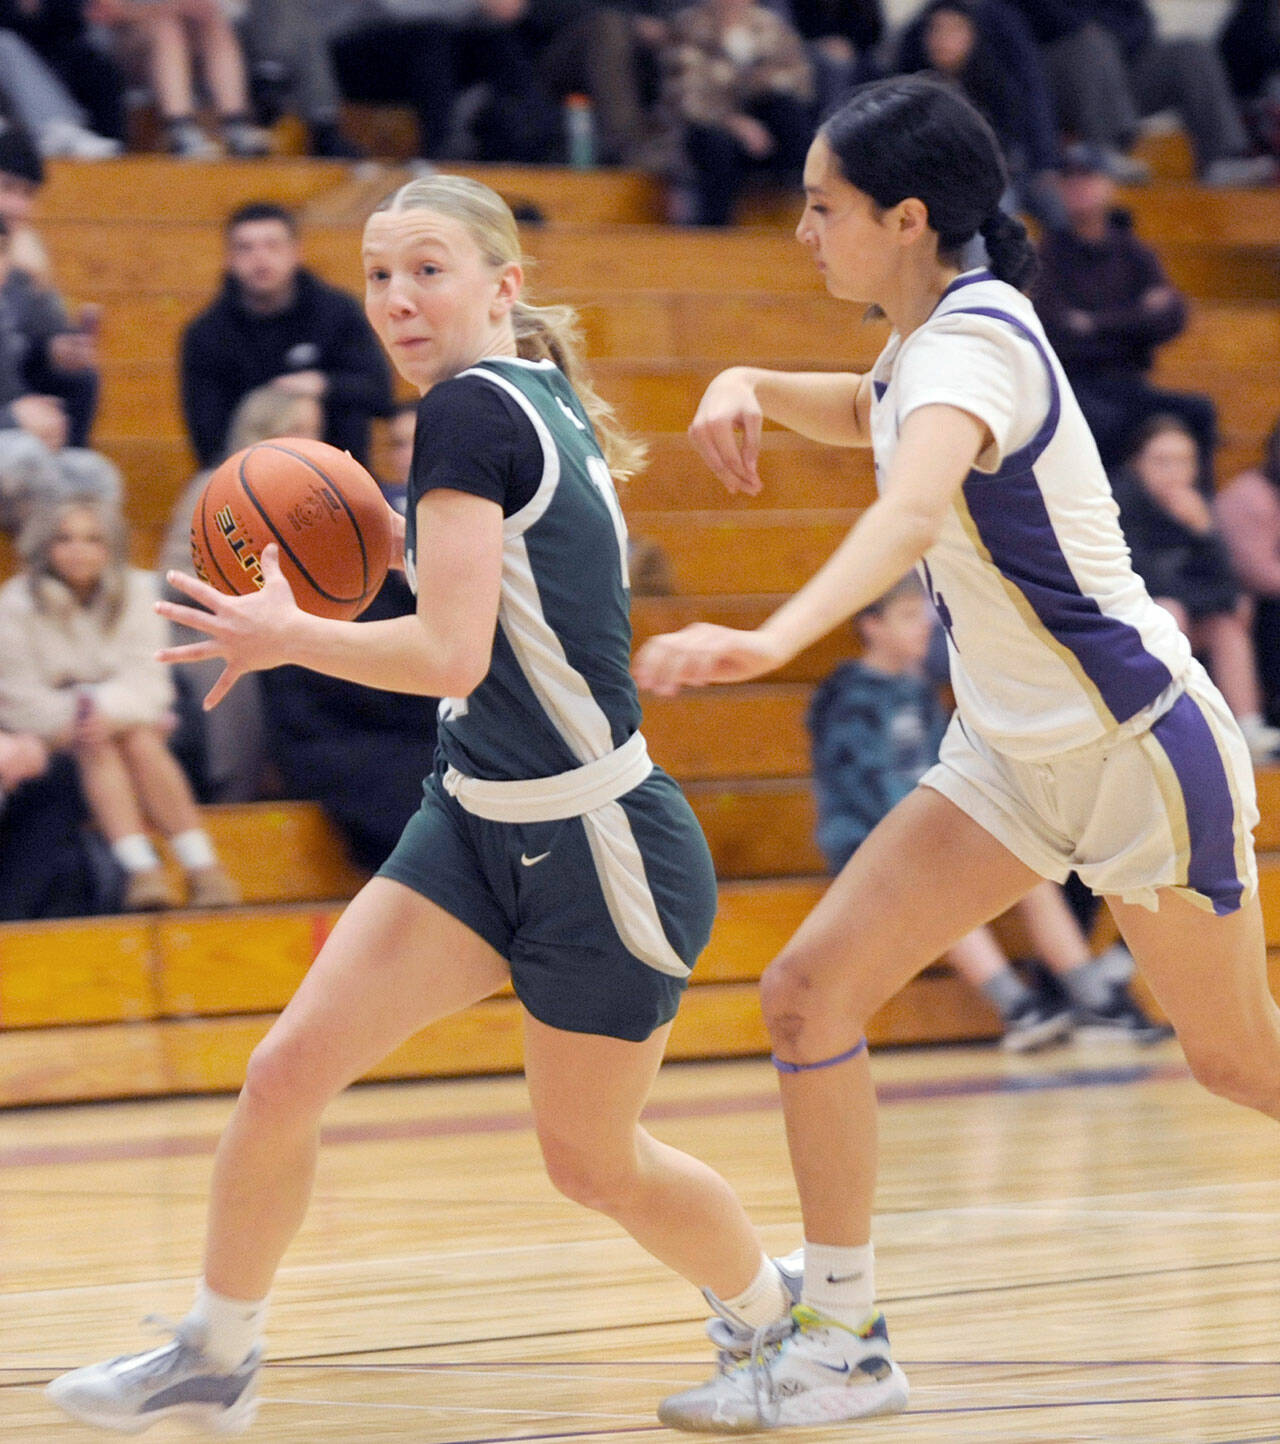 Michael Dashiell/Olympic Peninsula News Group Port Angeles’ Izzy Felton dribbles around the defense of Sequim’s Gracie Chartraw during the Riders’ 66-64 Rainshadow Rumble rivalry win over the Wolves on Thursday.